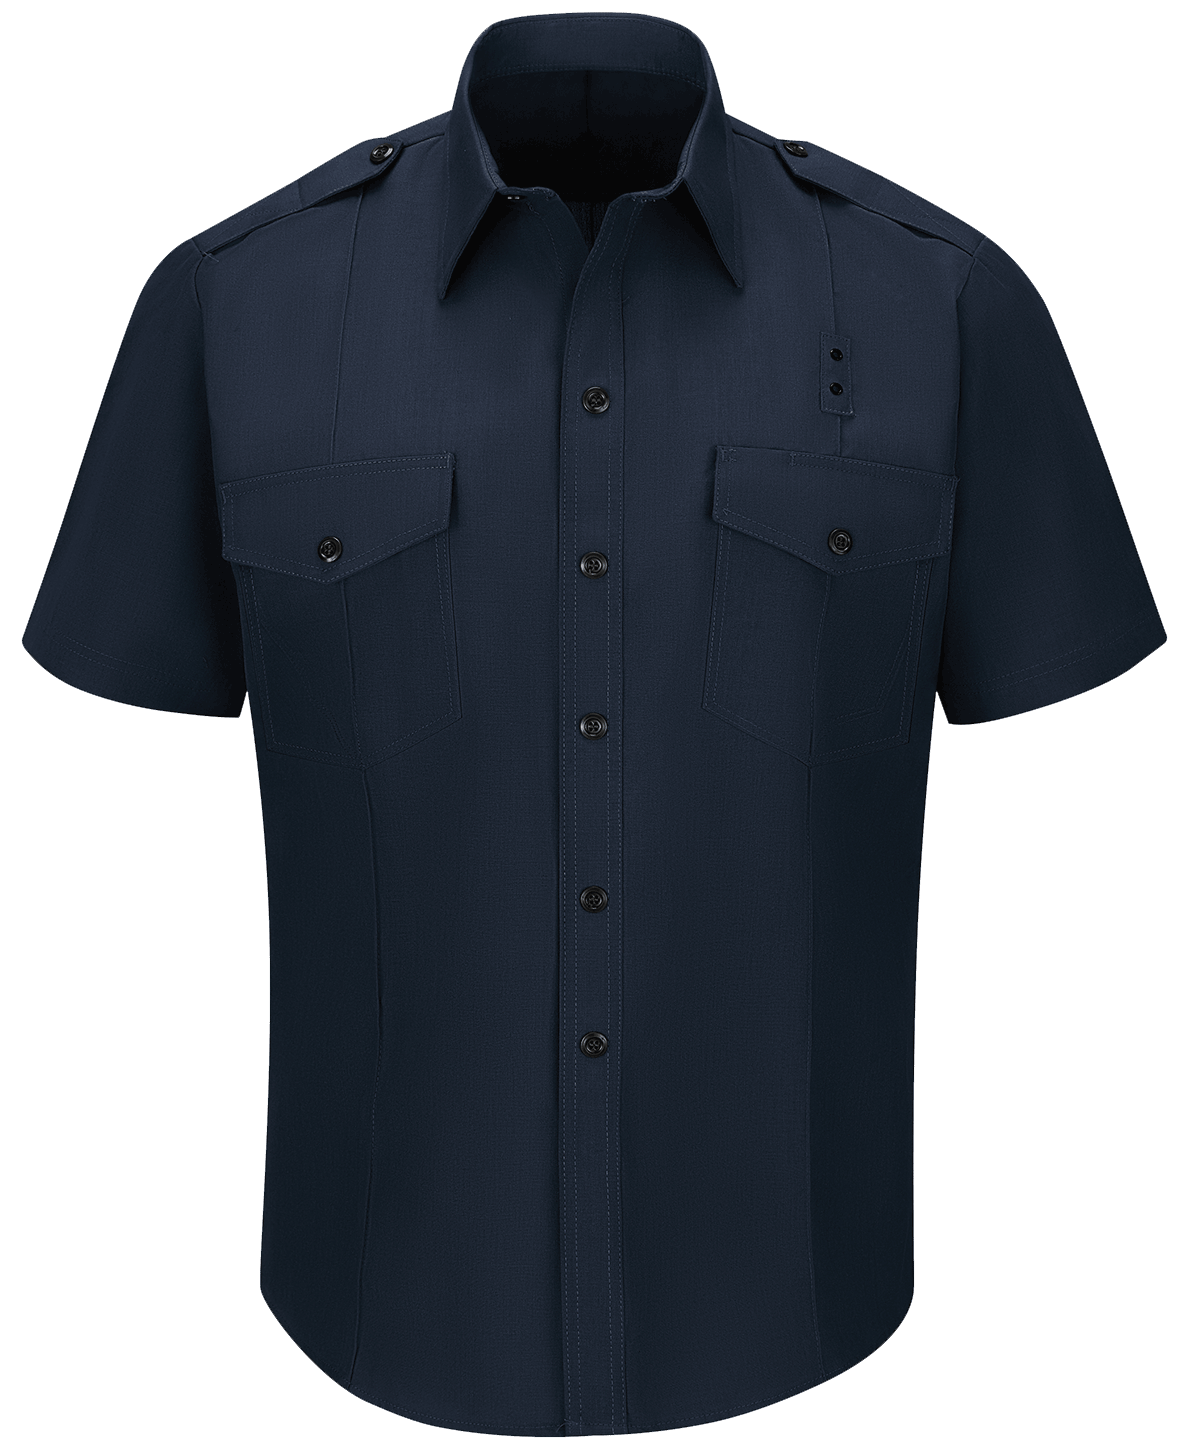 Workrite Tall S/S Nomex Shirt